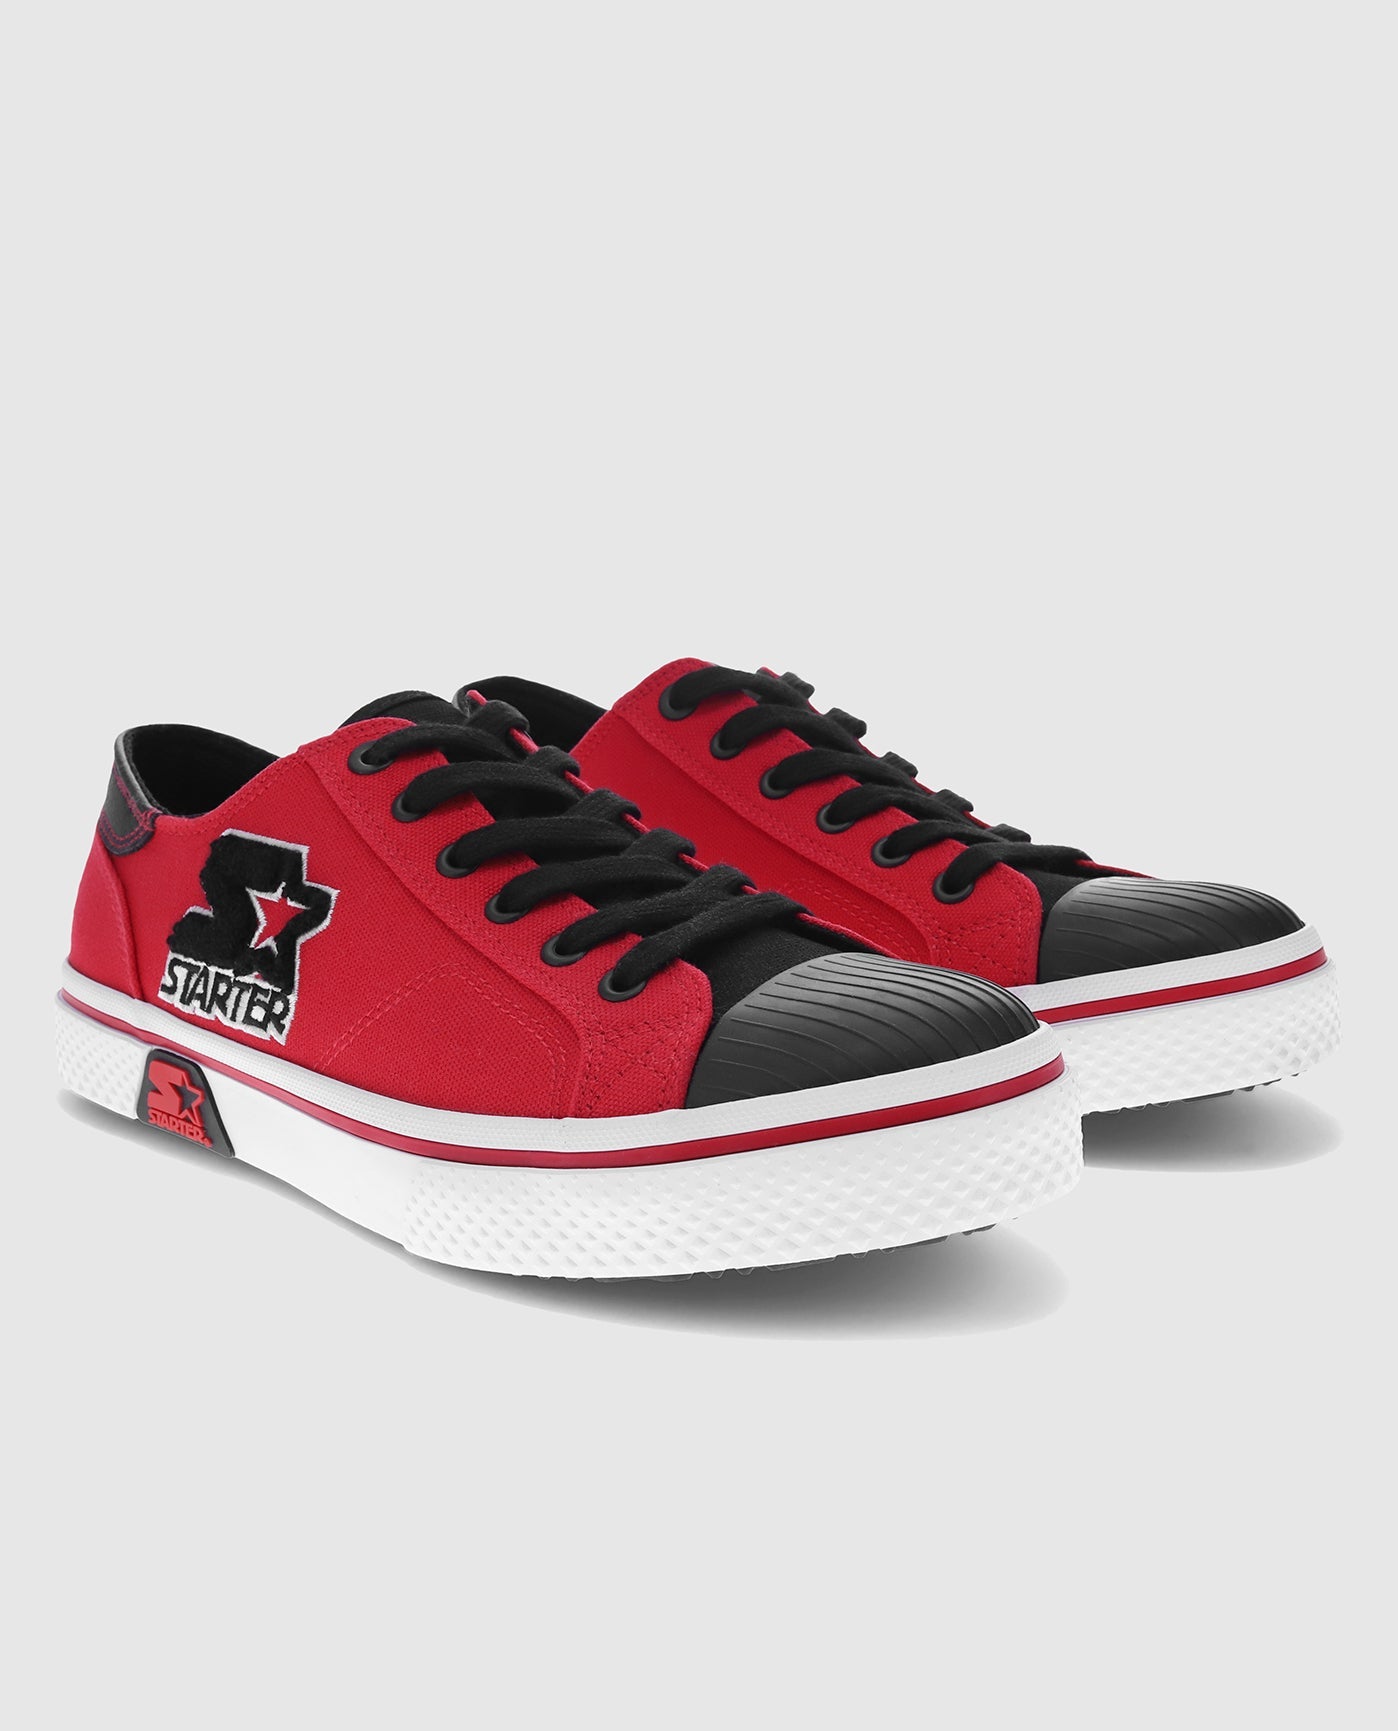 Front of Starter Tradition 71 Low Red Sneaker Pair | Red